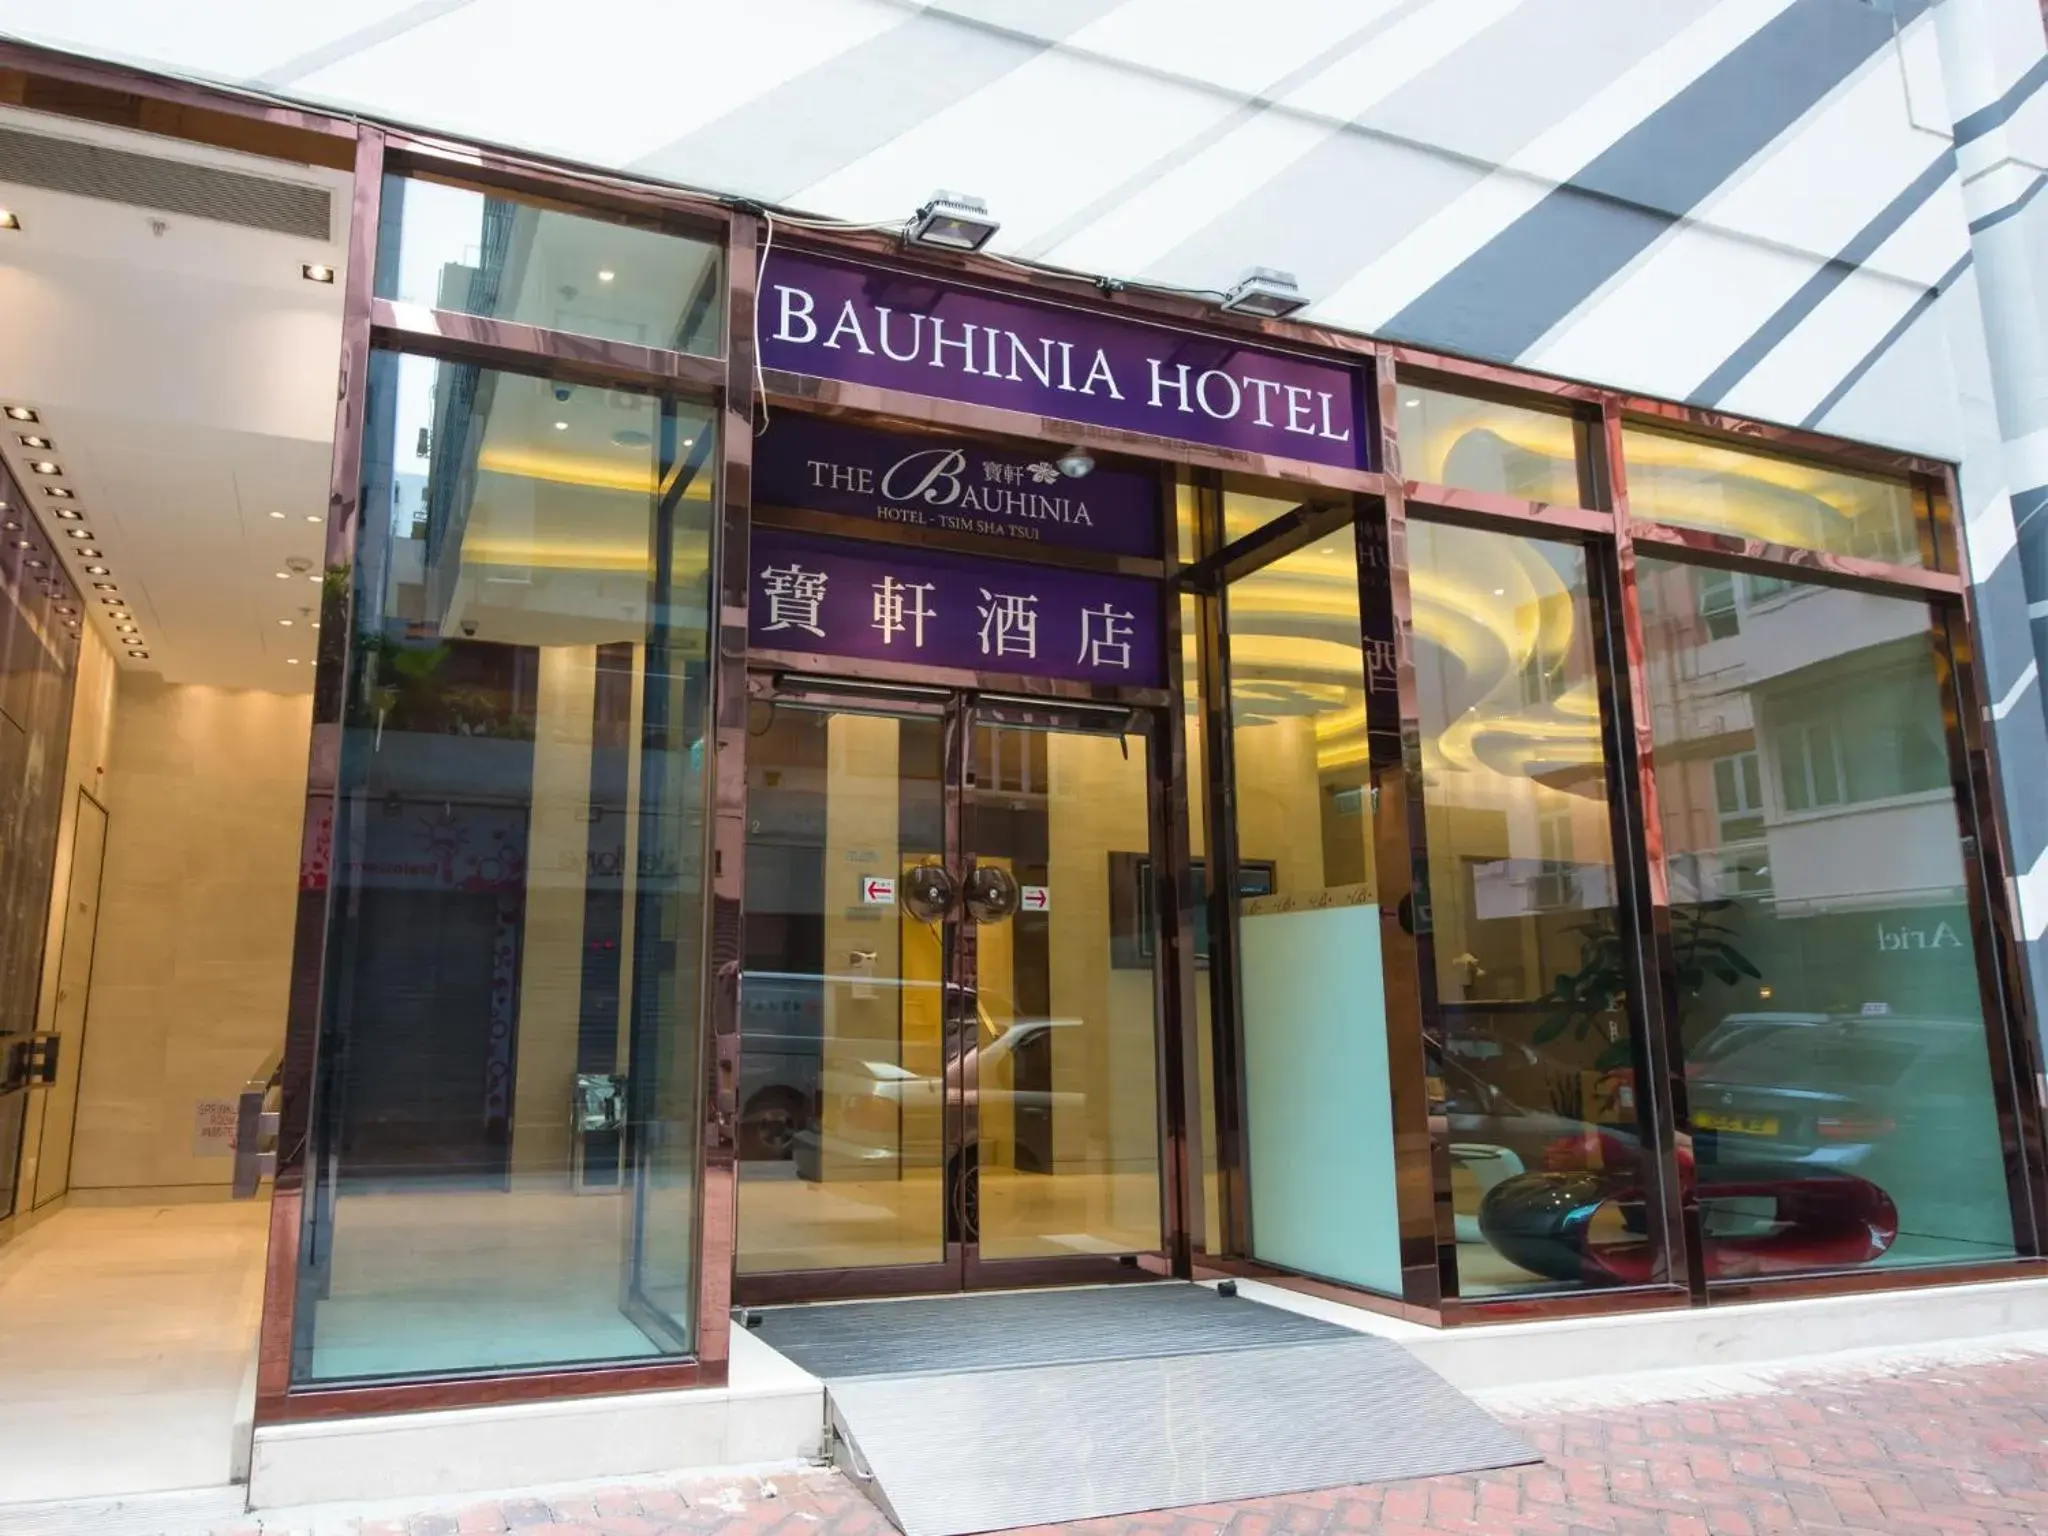 Property building in The Bauhinia Hotel-Tst